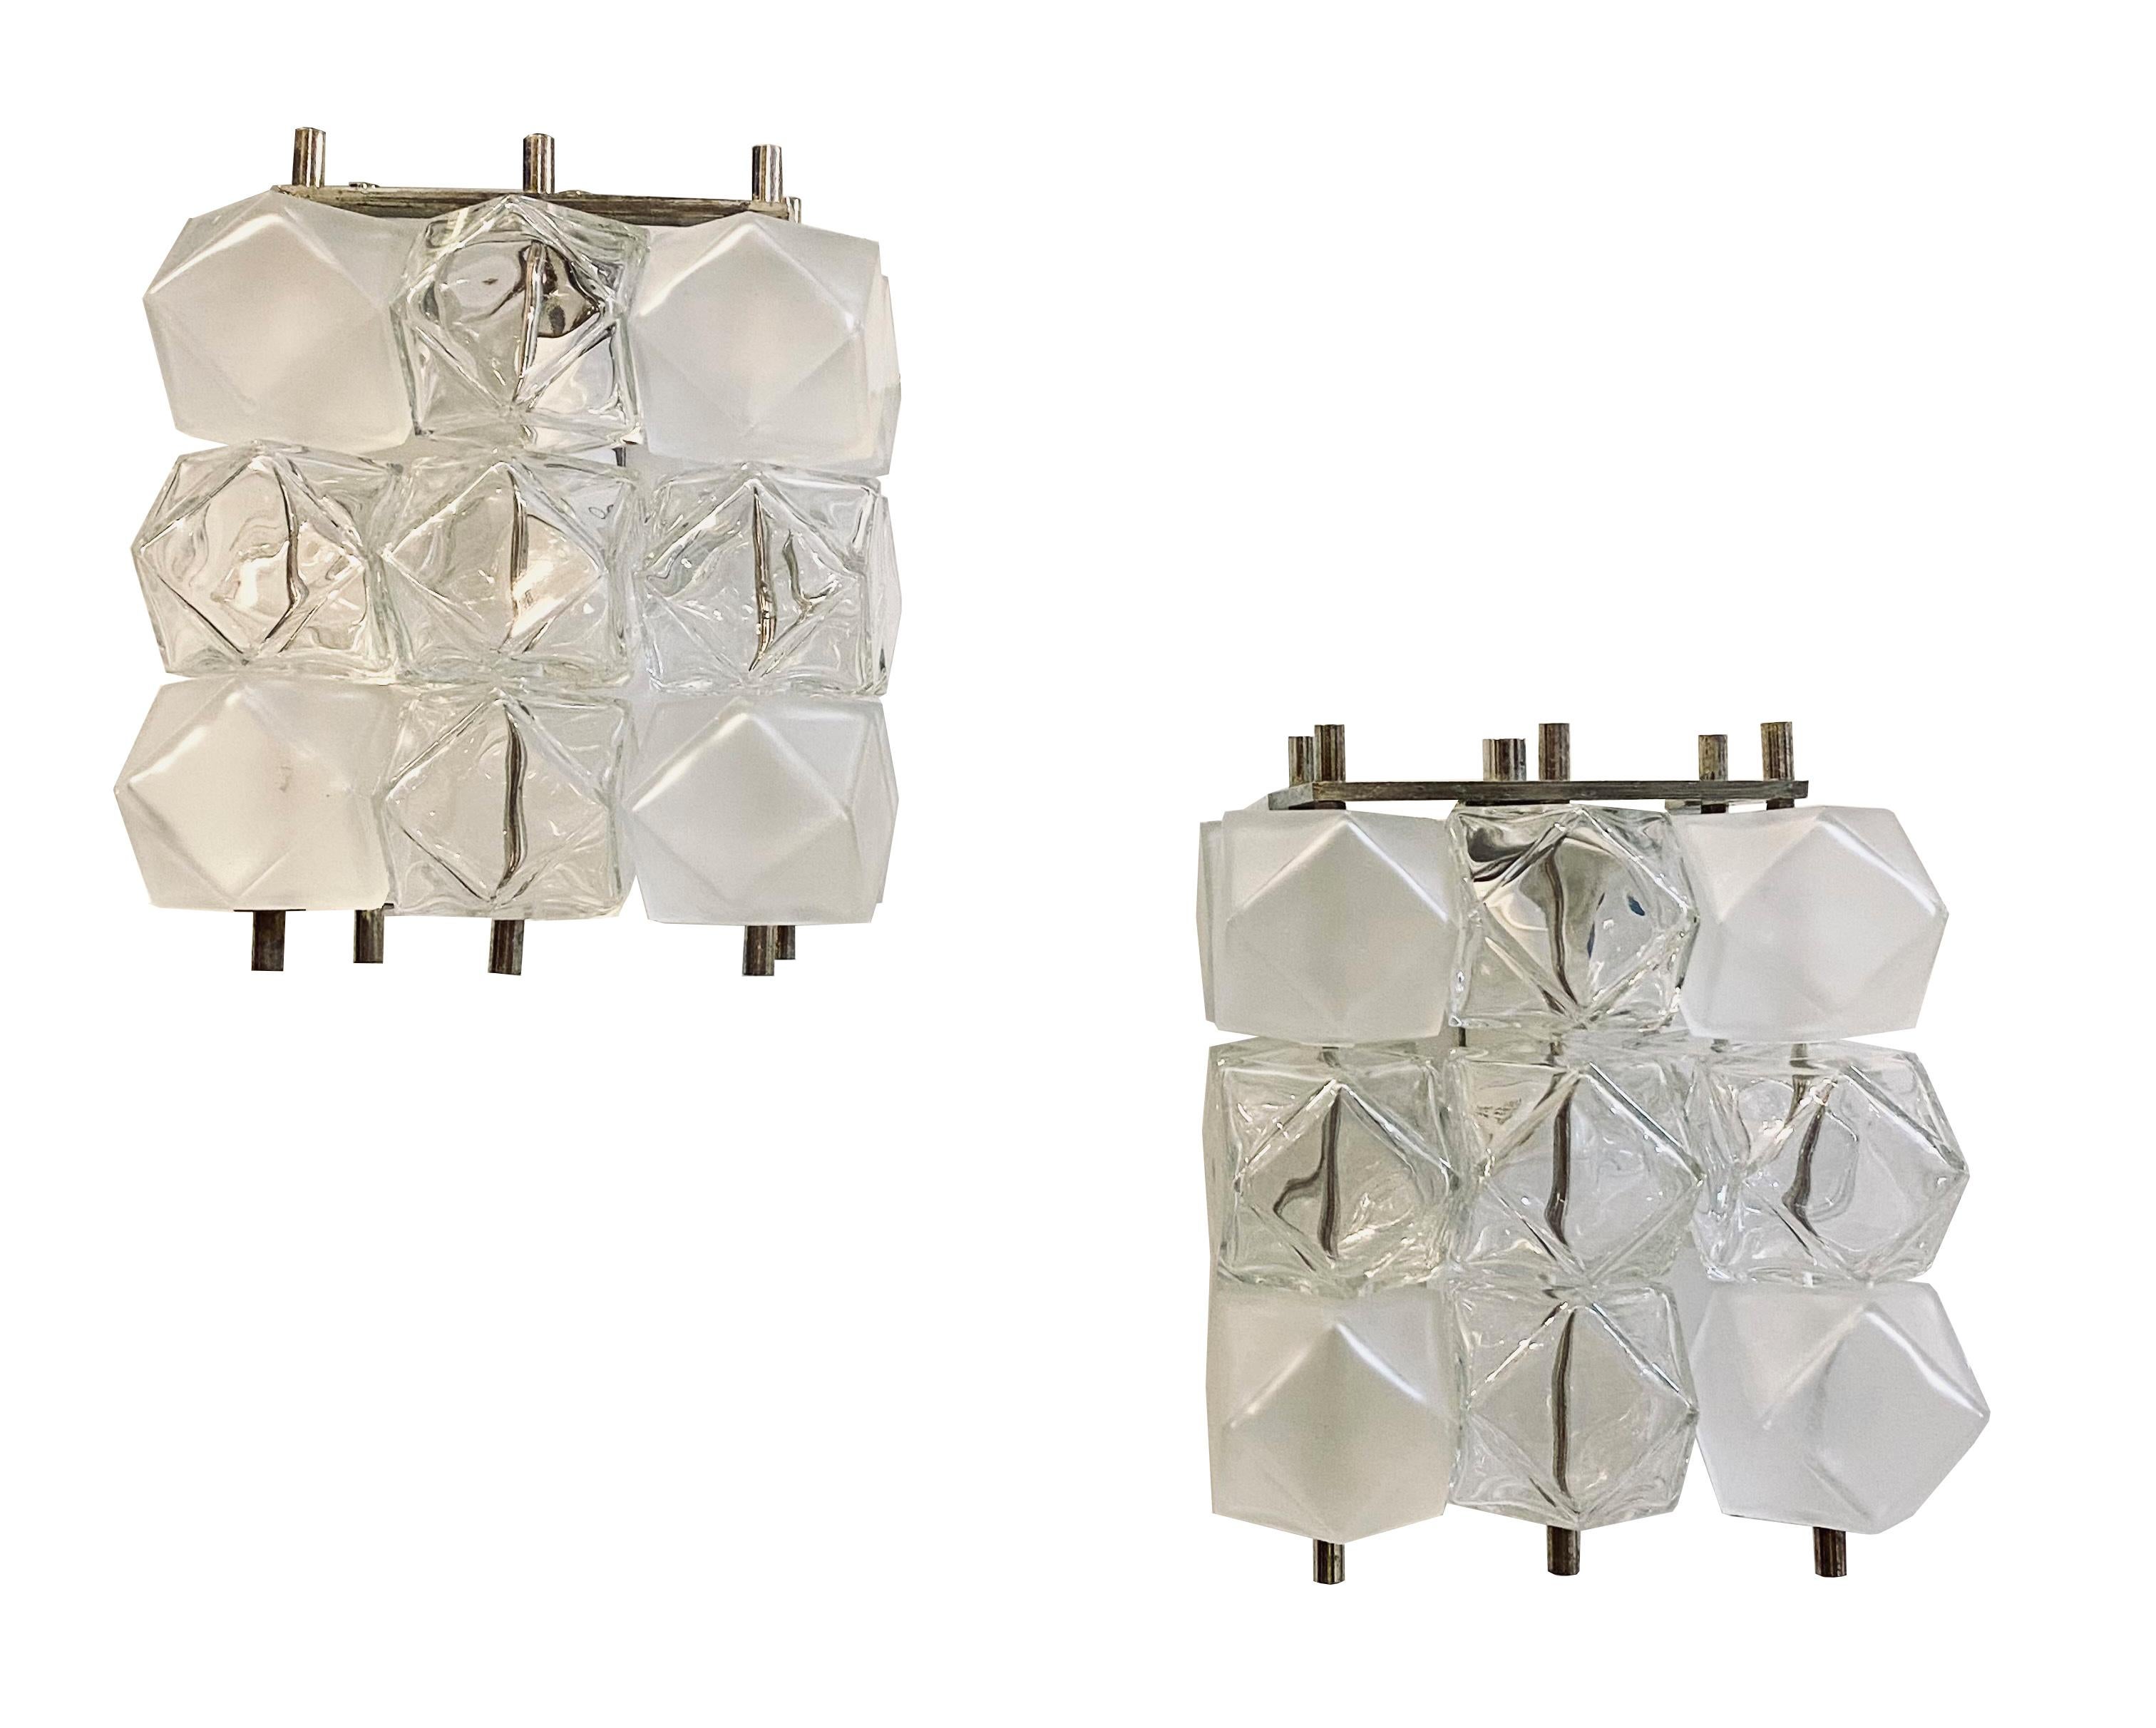 Wall lamps with 15 crystals, chrome metal frame and 1 glass light by Filvem Voghera, Milan, 1968, set of 2.Light wear consistent with age and use, Patina consistent with age and use